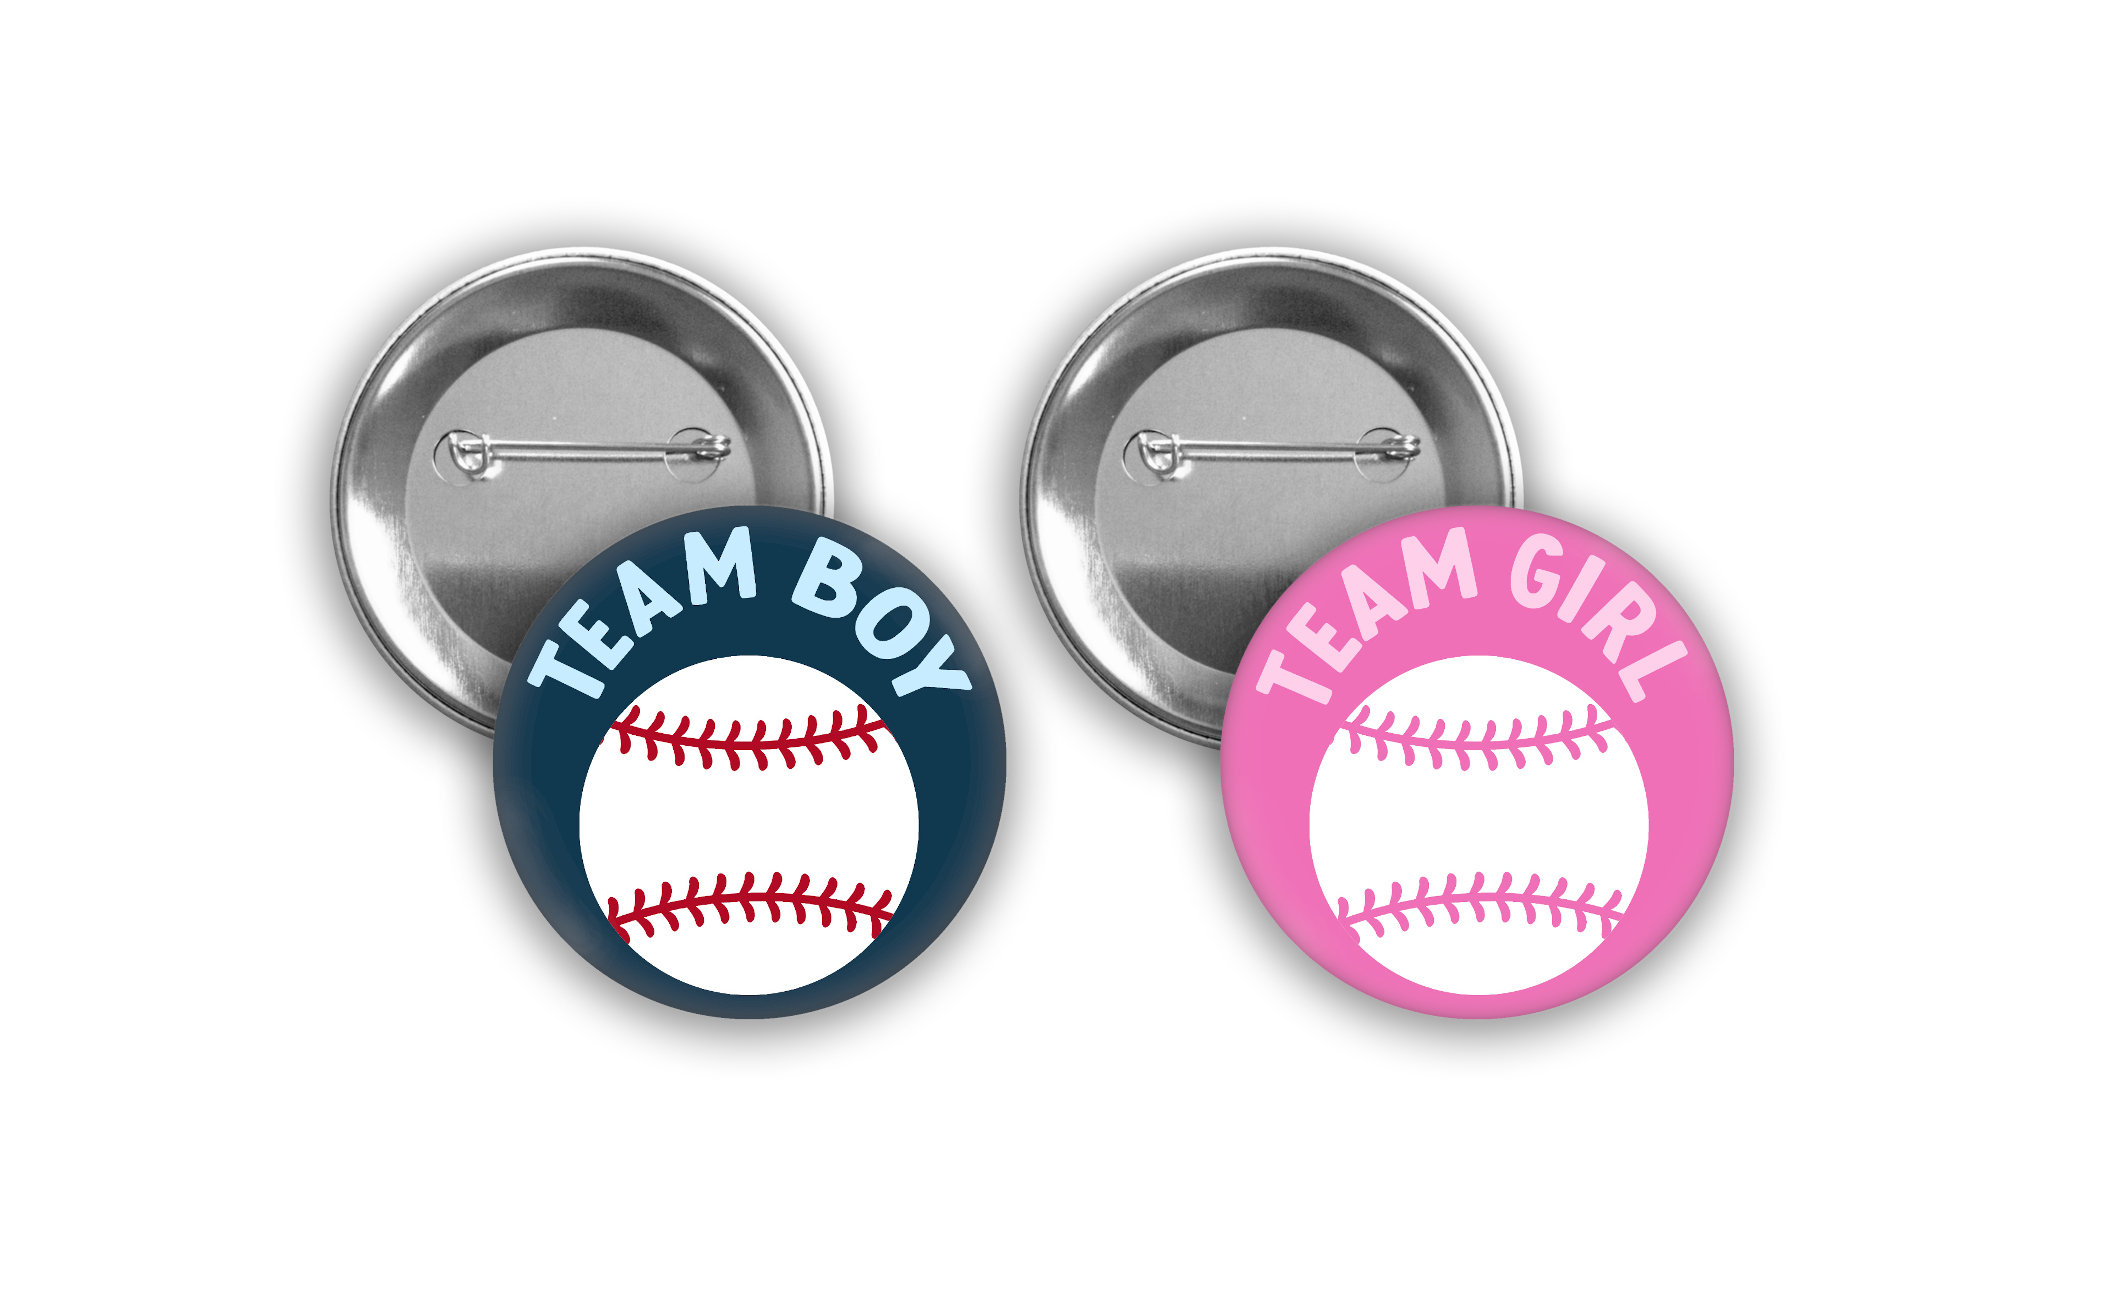 Team Girl and Team Boy Baseball Gender Reveal Pins With Pink and Navy Blue  With Pink and Red Threads. Perfect for Baseball Themed Party. 